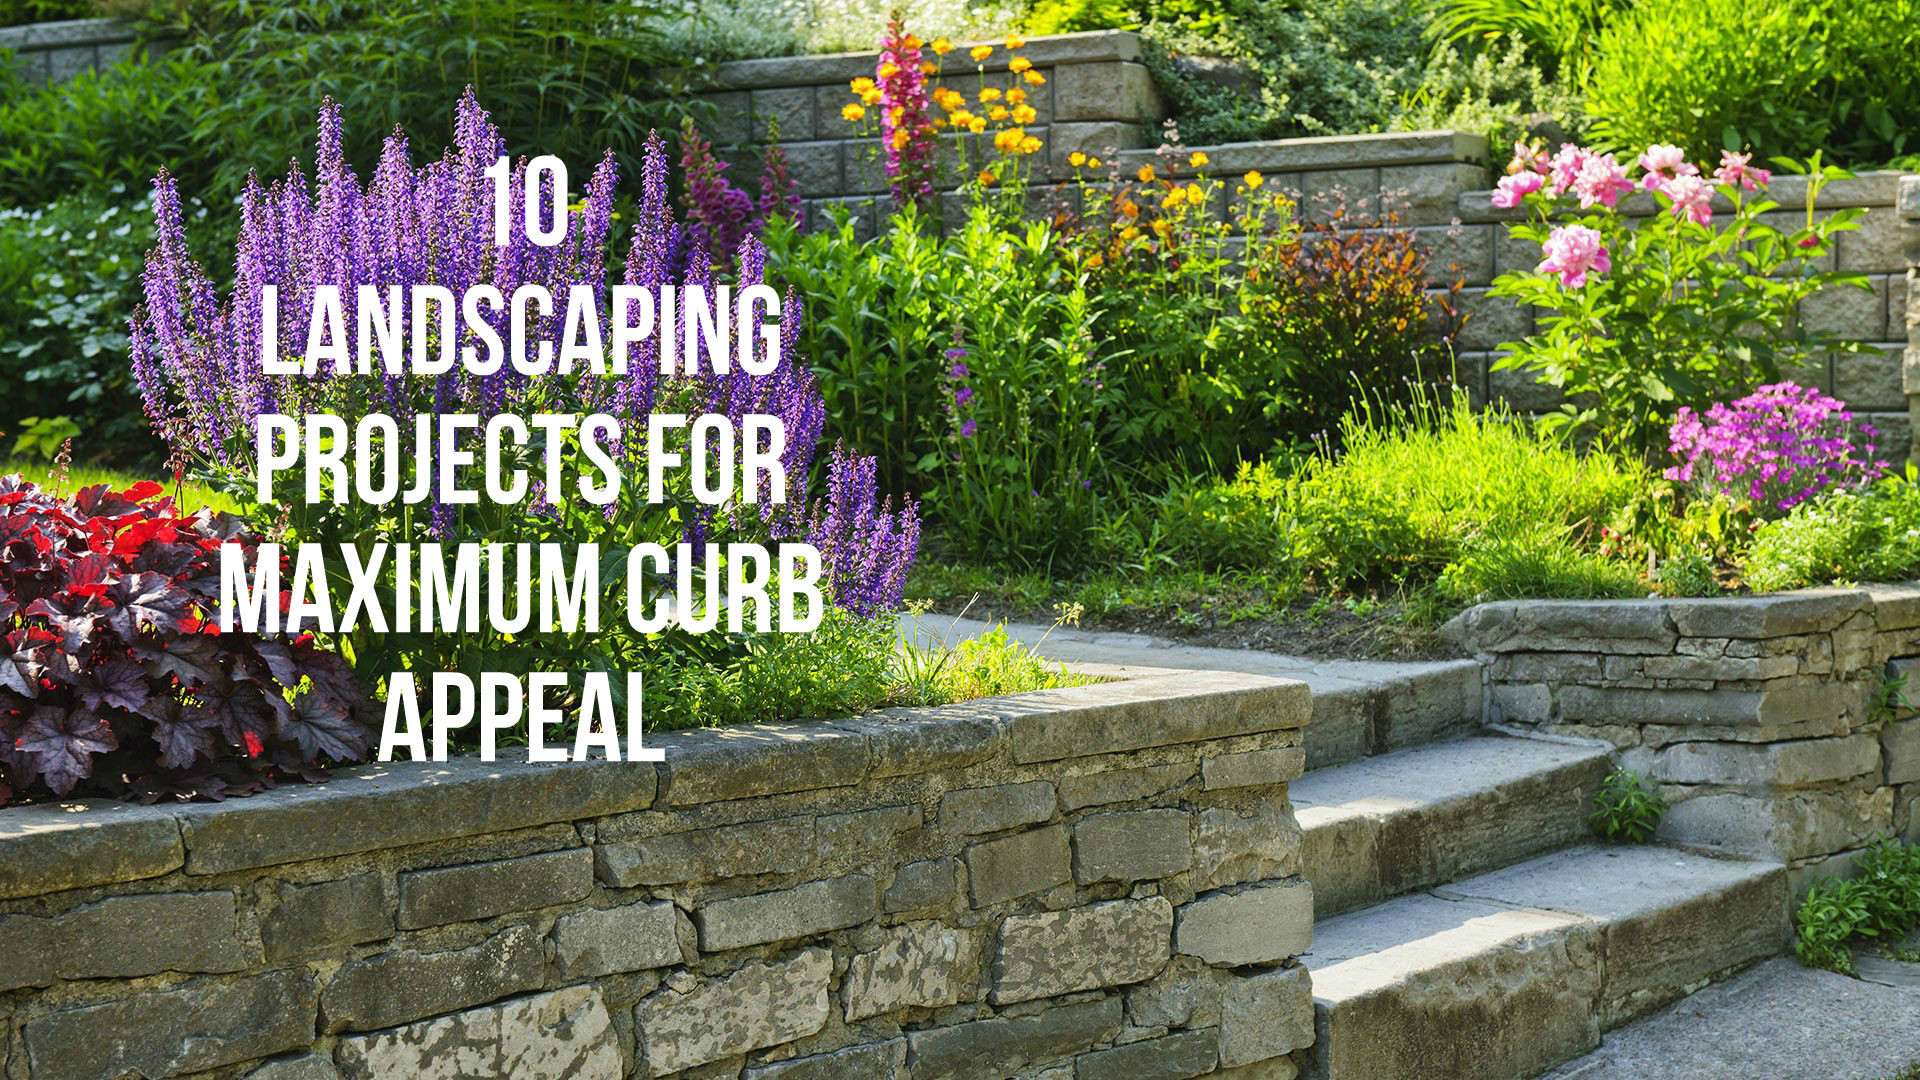 Terrace Landscape Curb Appeal
 10 Landscaping Projects for Maximum Curb Appeal